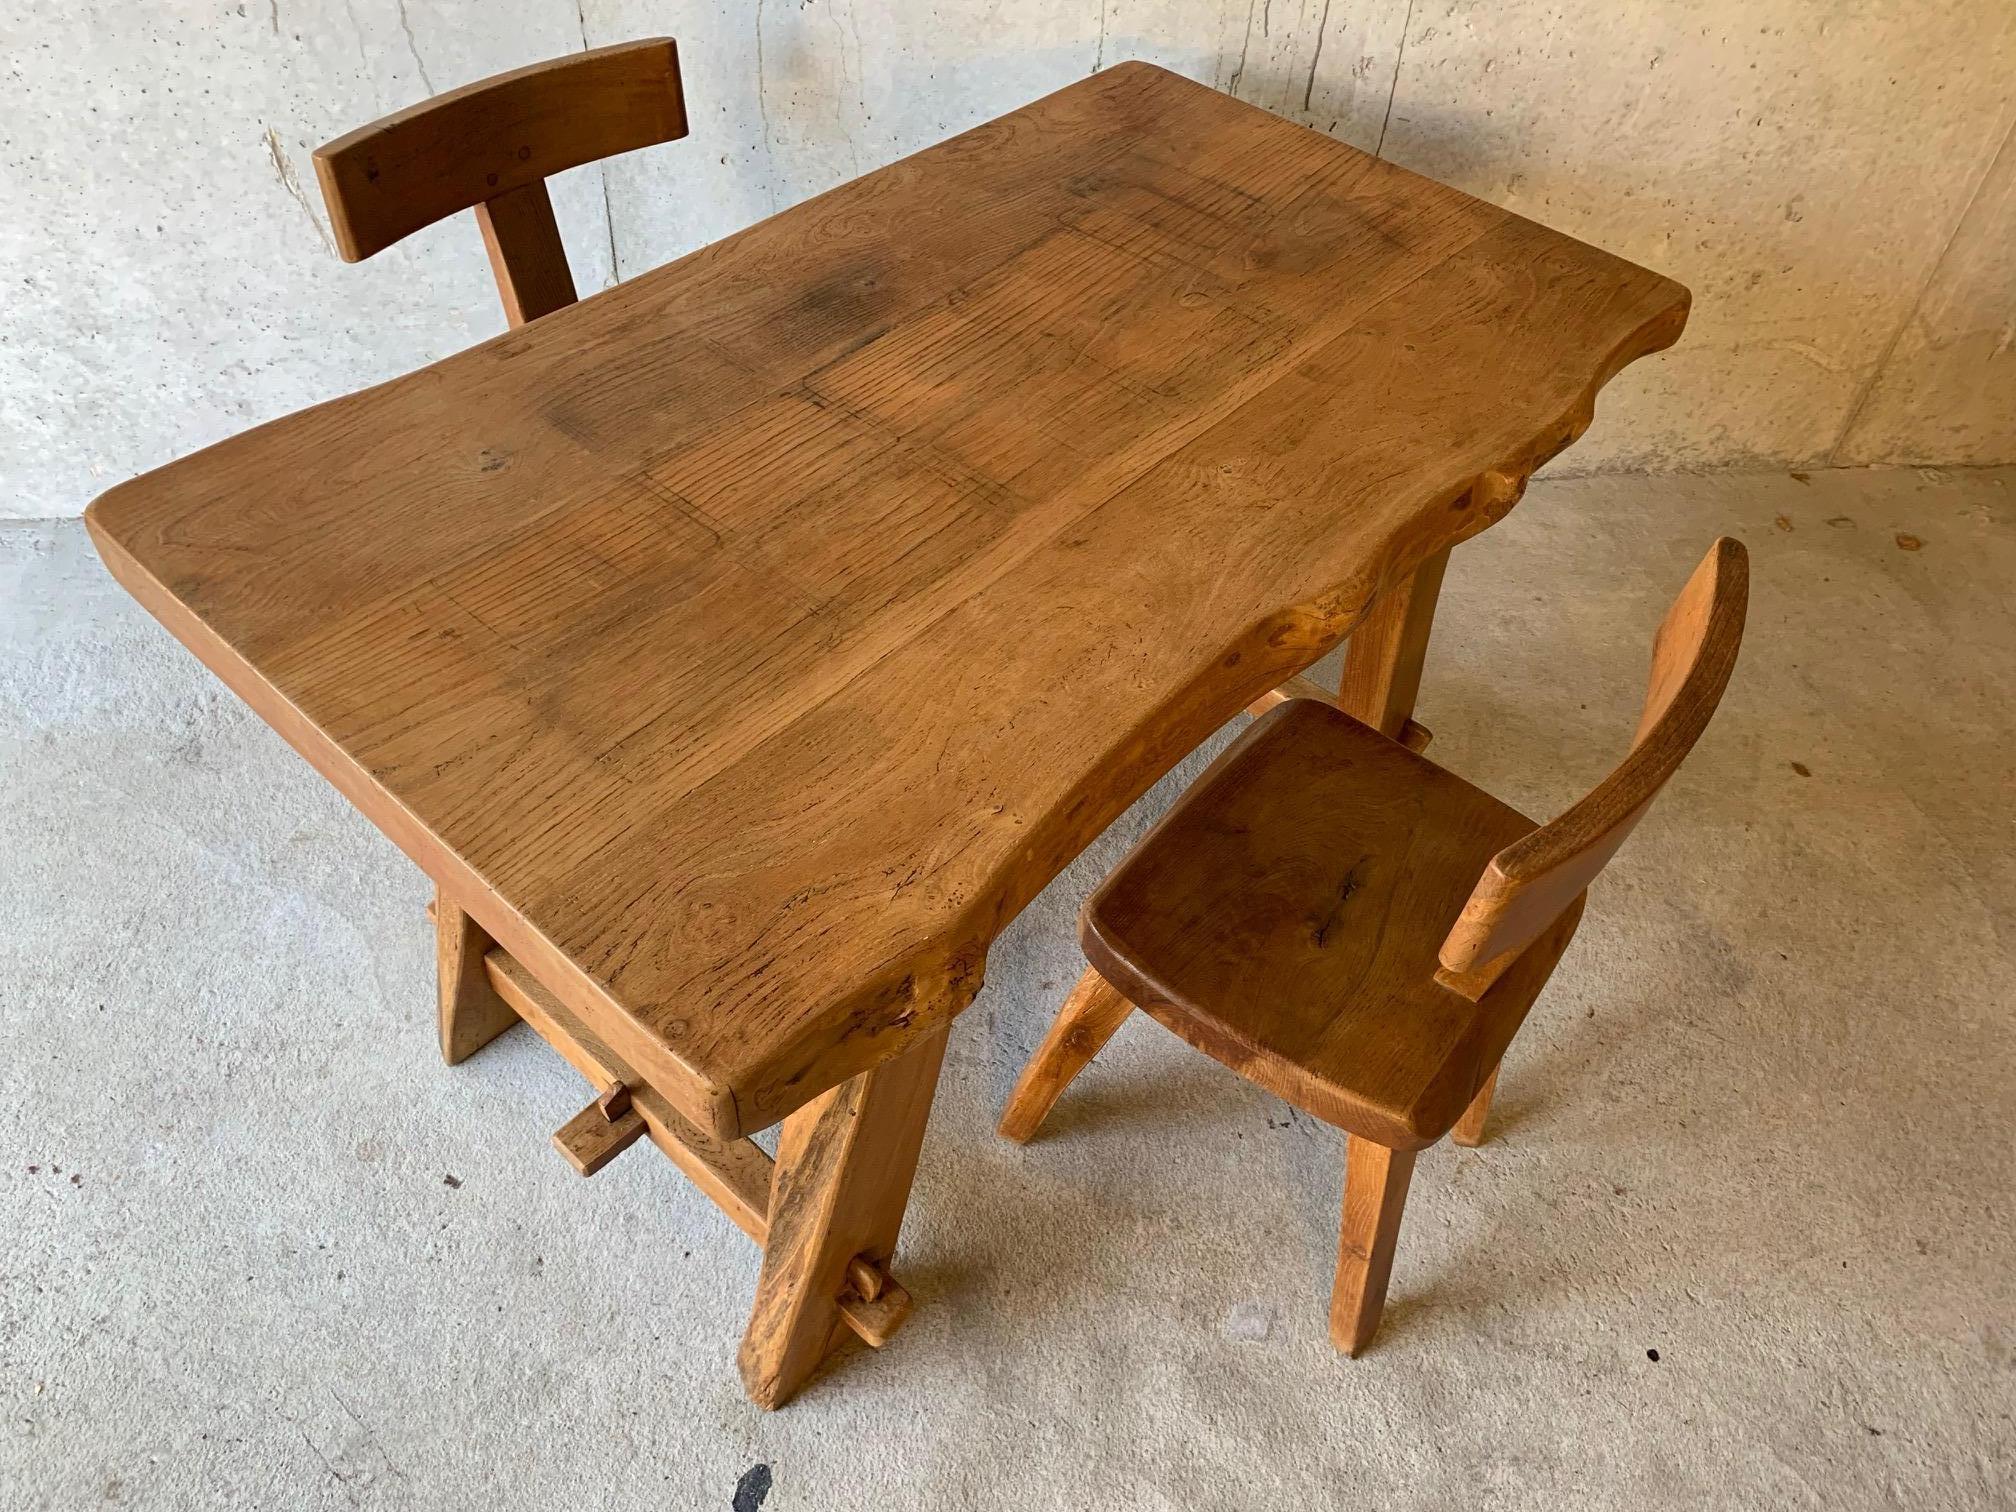 Set of one elm wood table and two chairs by Olavi Hänninen for Miko Nupponen. Dimensions indicated below are for the table. Chairs dimensions are 80 x 46 x 39 cm.